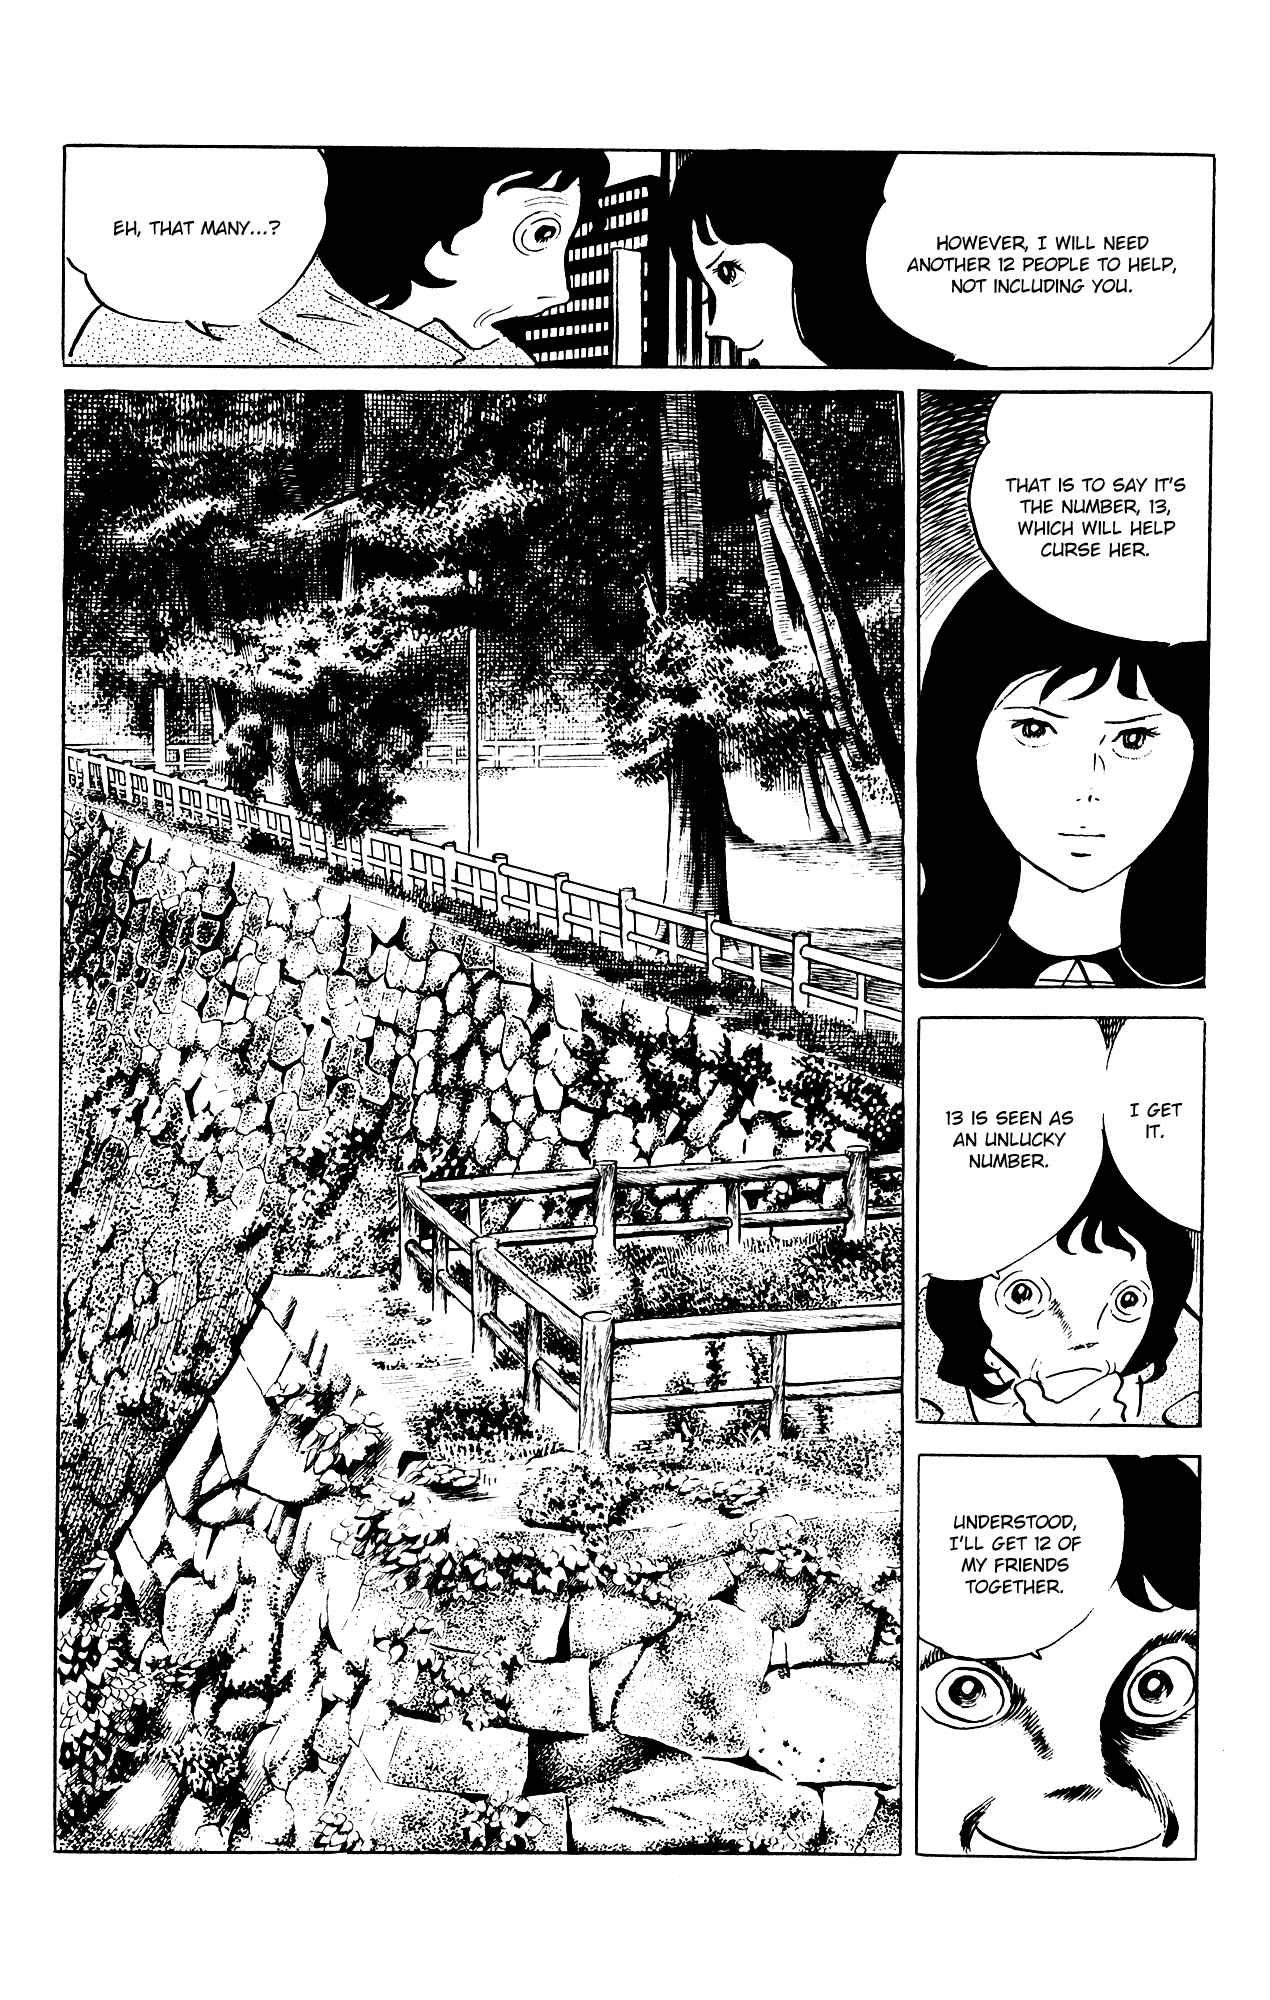 Eko Eko Azarak Vol. 9 Ch. 79 Curses Are Like Chickens, They Always Come Home to Roost